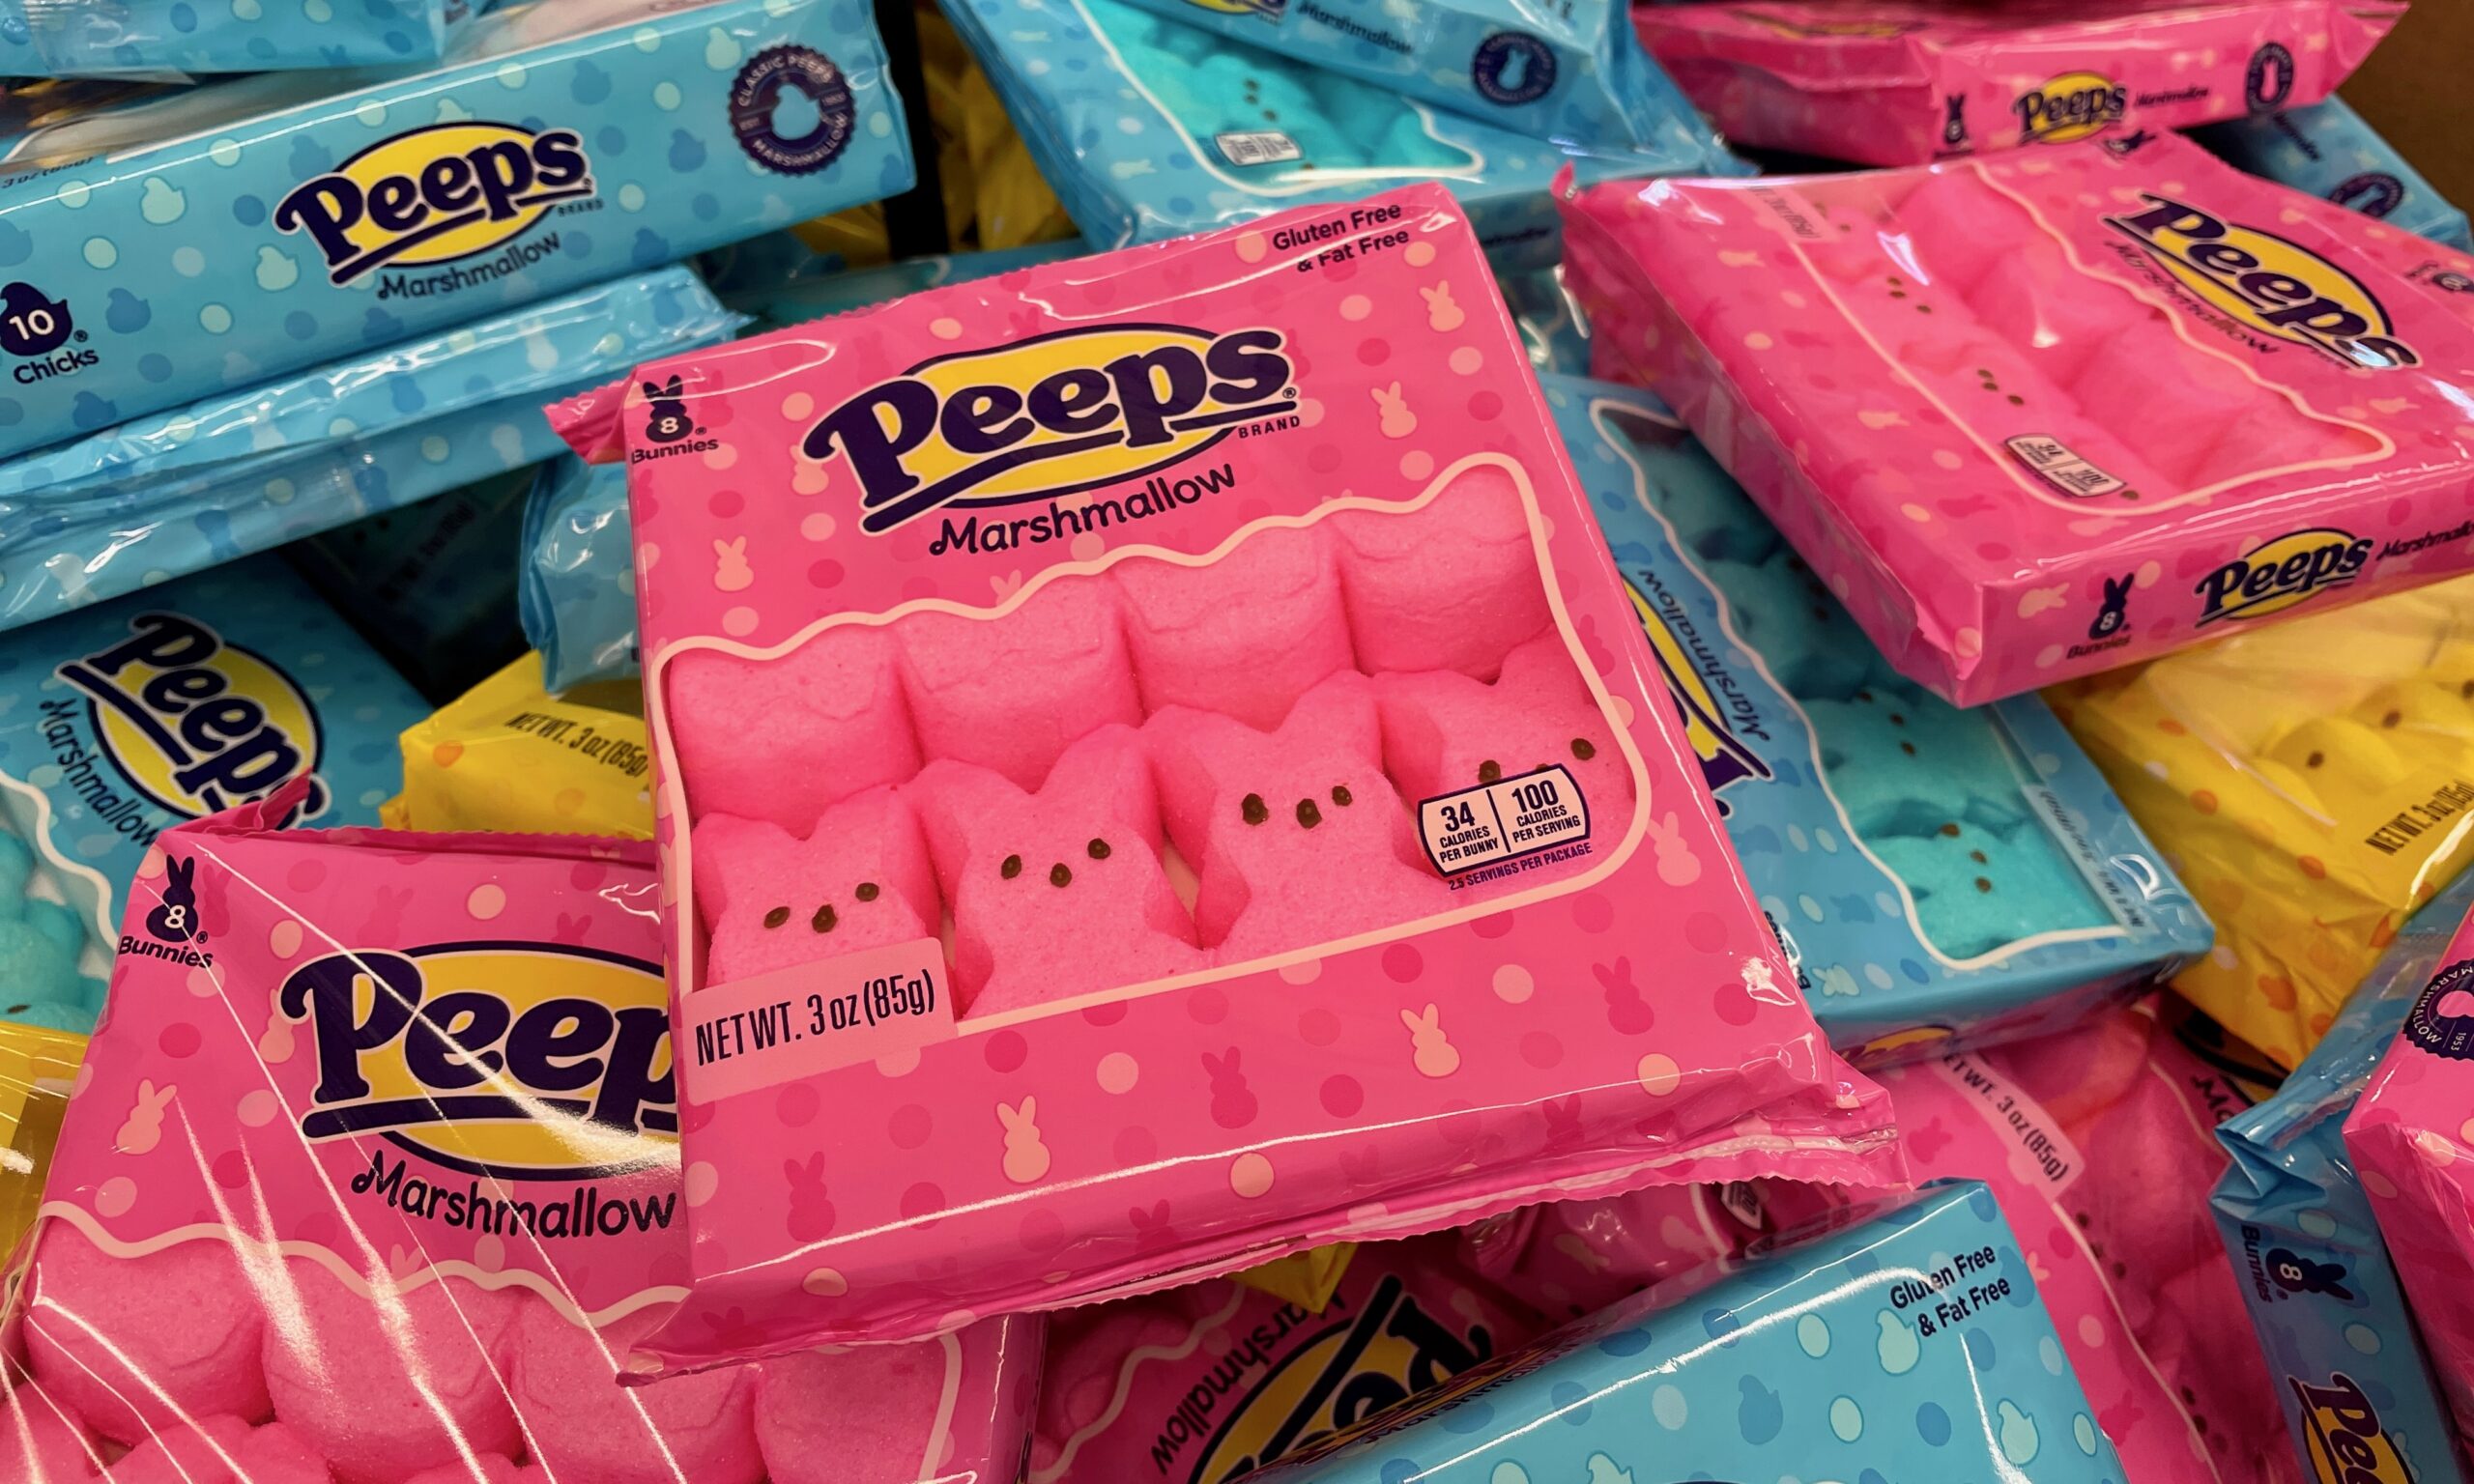 A photograph of a pile of Peeps packages, both pink and blue.